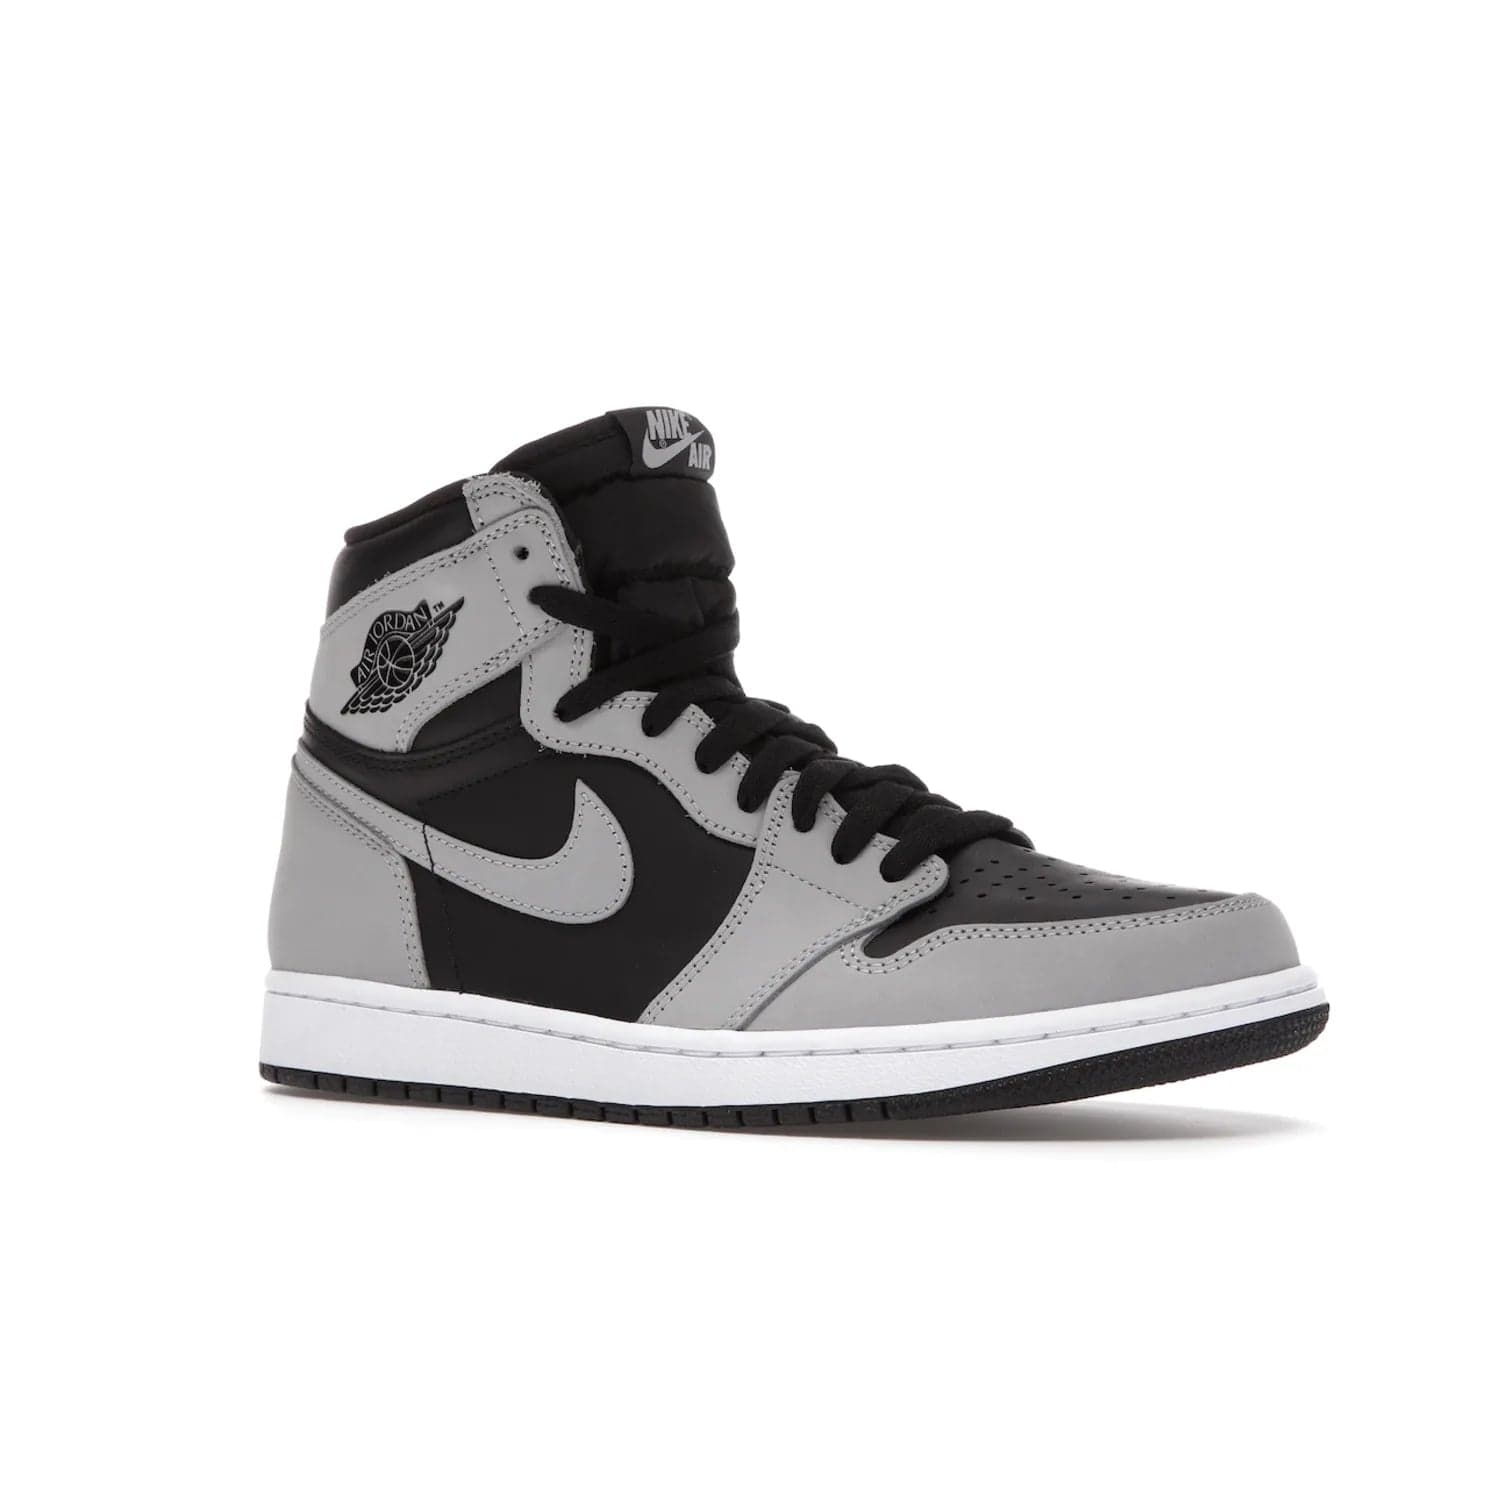 Jordan 1 Retro High Shadow 2.0 - Image 4 - Only at www.BallersClubKickz.com - #
Classic Air Jordan 1 Retro High Shadow 2.0 with black leather base and Light Smoke Grey overlays. Released in May 2021.